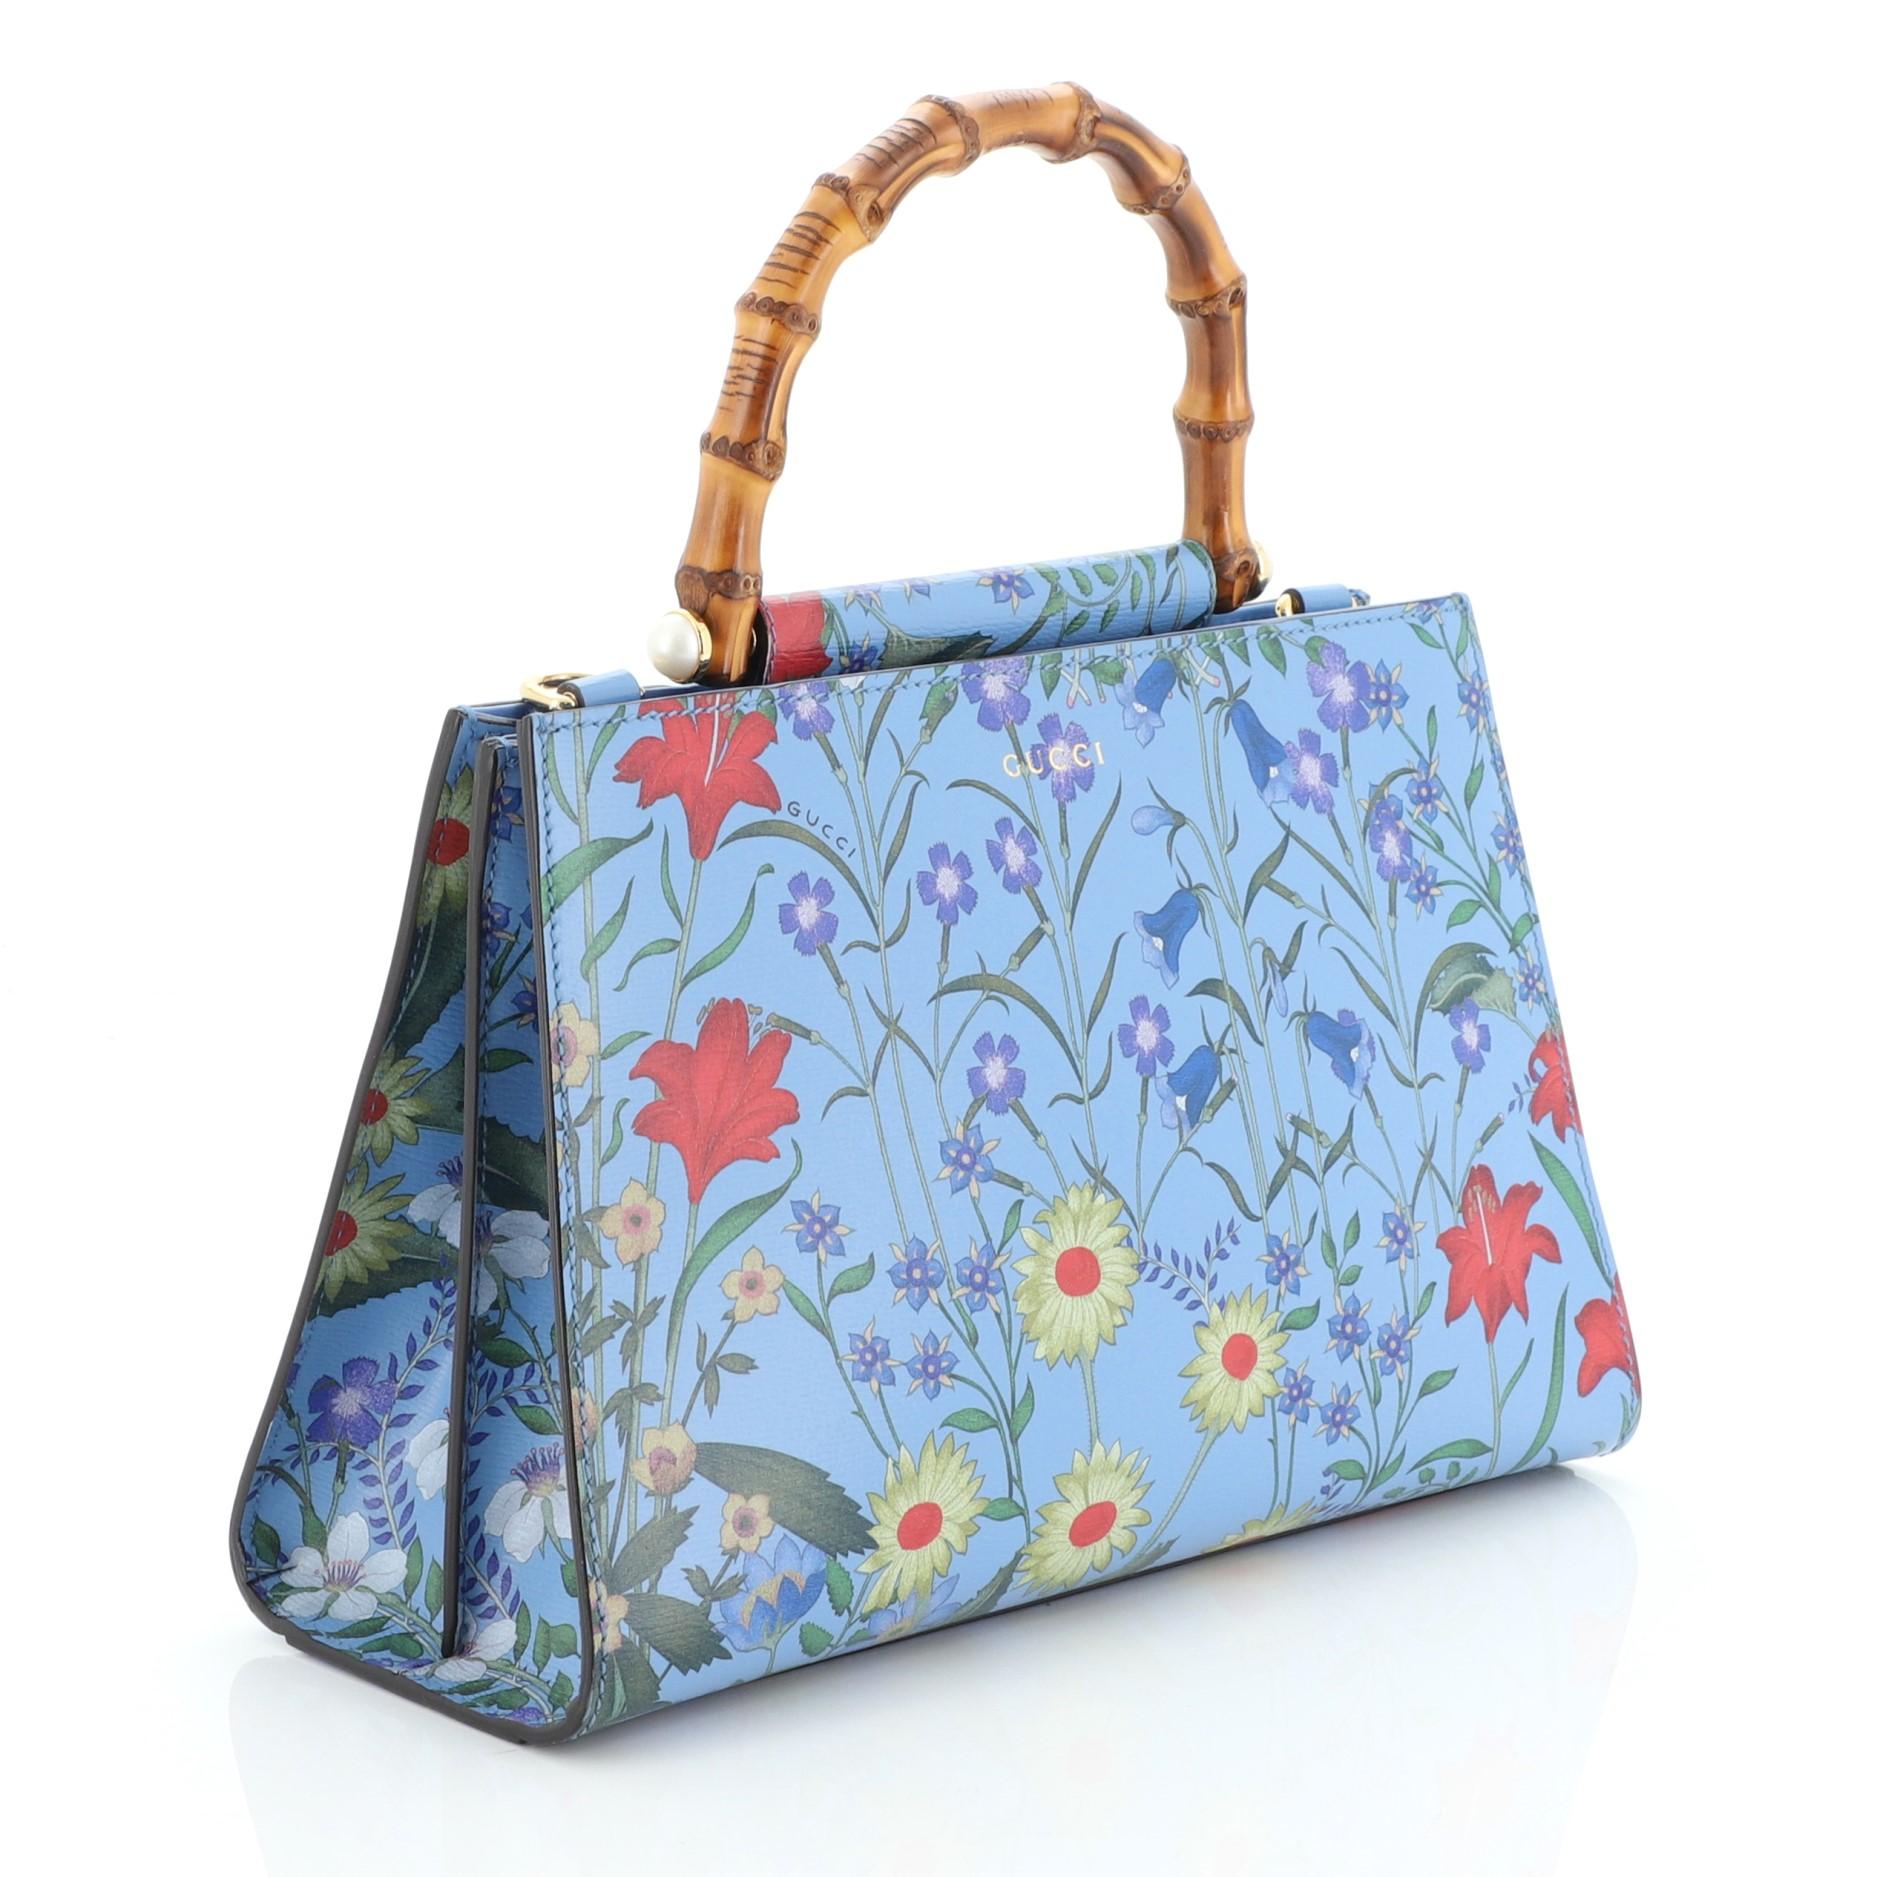 This Gucci Nymphaea Top Handle Bag Floral Printed Leather Small, crafted in printed floral blue leather, features a bamboo handle and gold-tone hardware. Its magnetic snap closure opens to a neutral microfiber interior with zip and slip pockets.